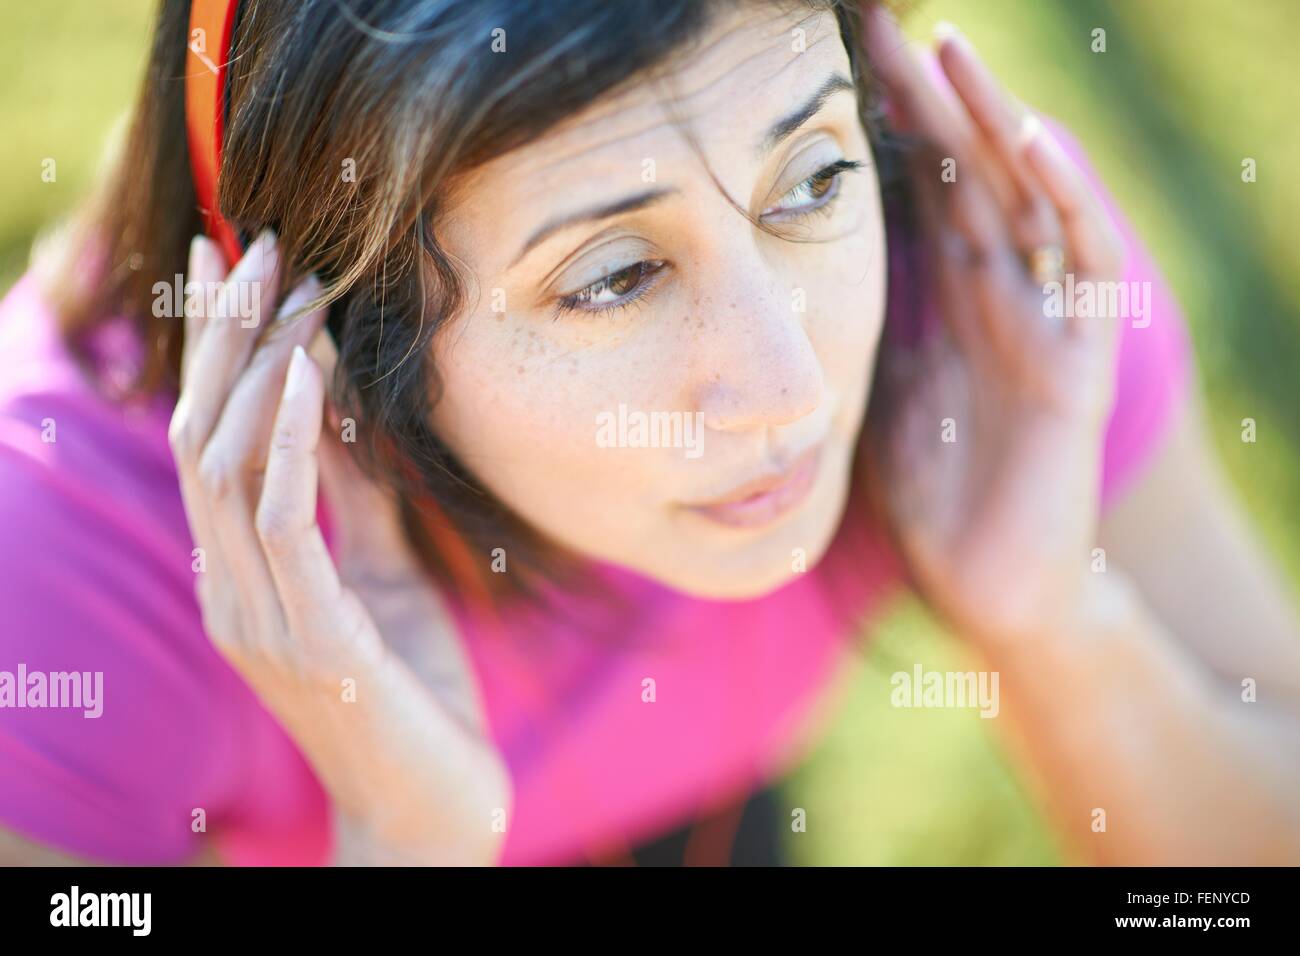 Cropped high angle view of mature woman wearing headphones, hands on ears looking away Stock Photo